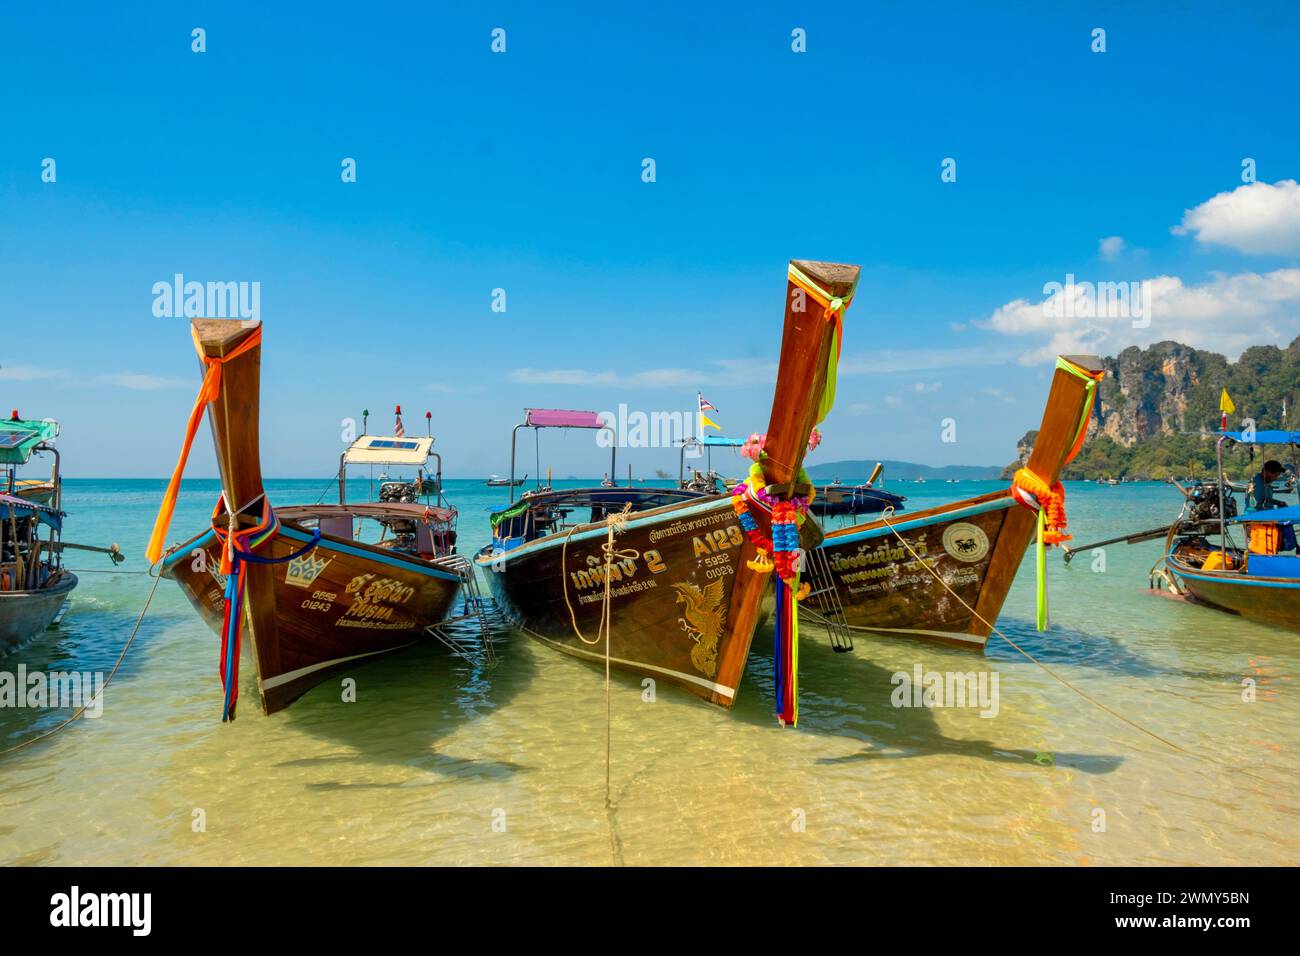 Thailand, Krabi province, West Railay, Long tail boat, long tail boat on the beach Stock Photo